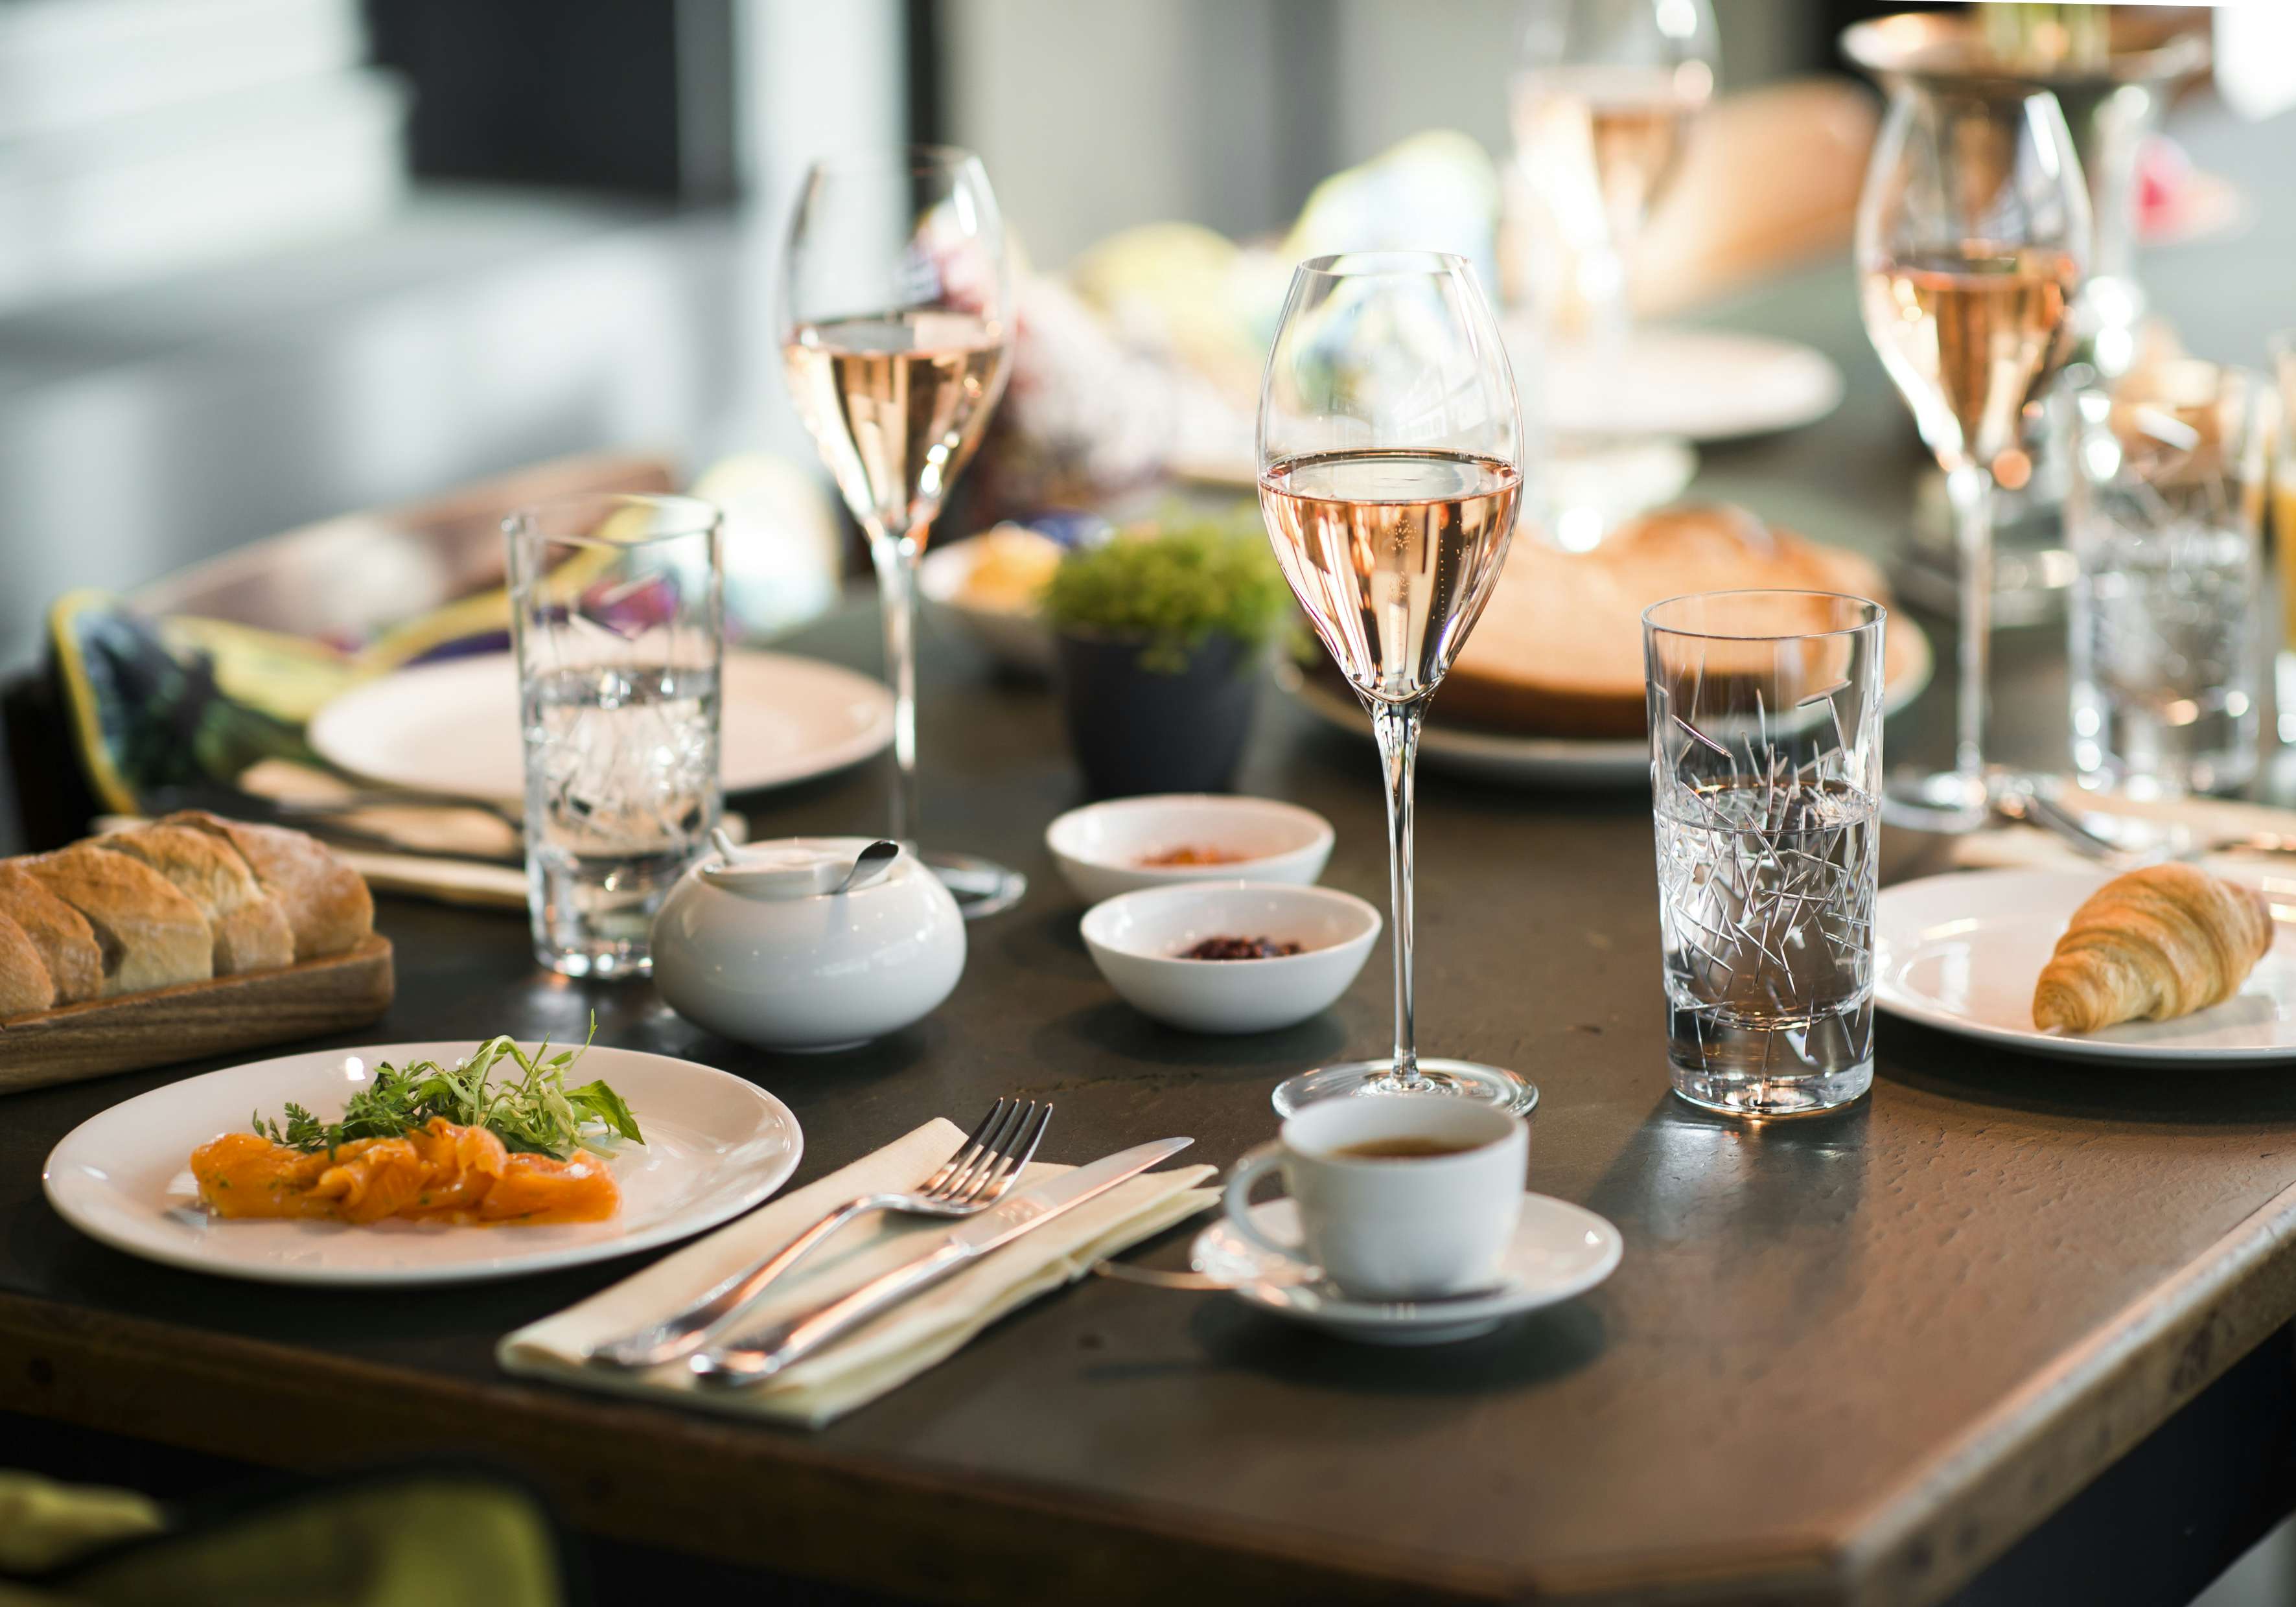 Table with bread, dips, main dishes and sparkling wine at Brasserie Colette by Tim Raue.